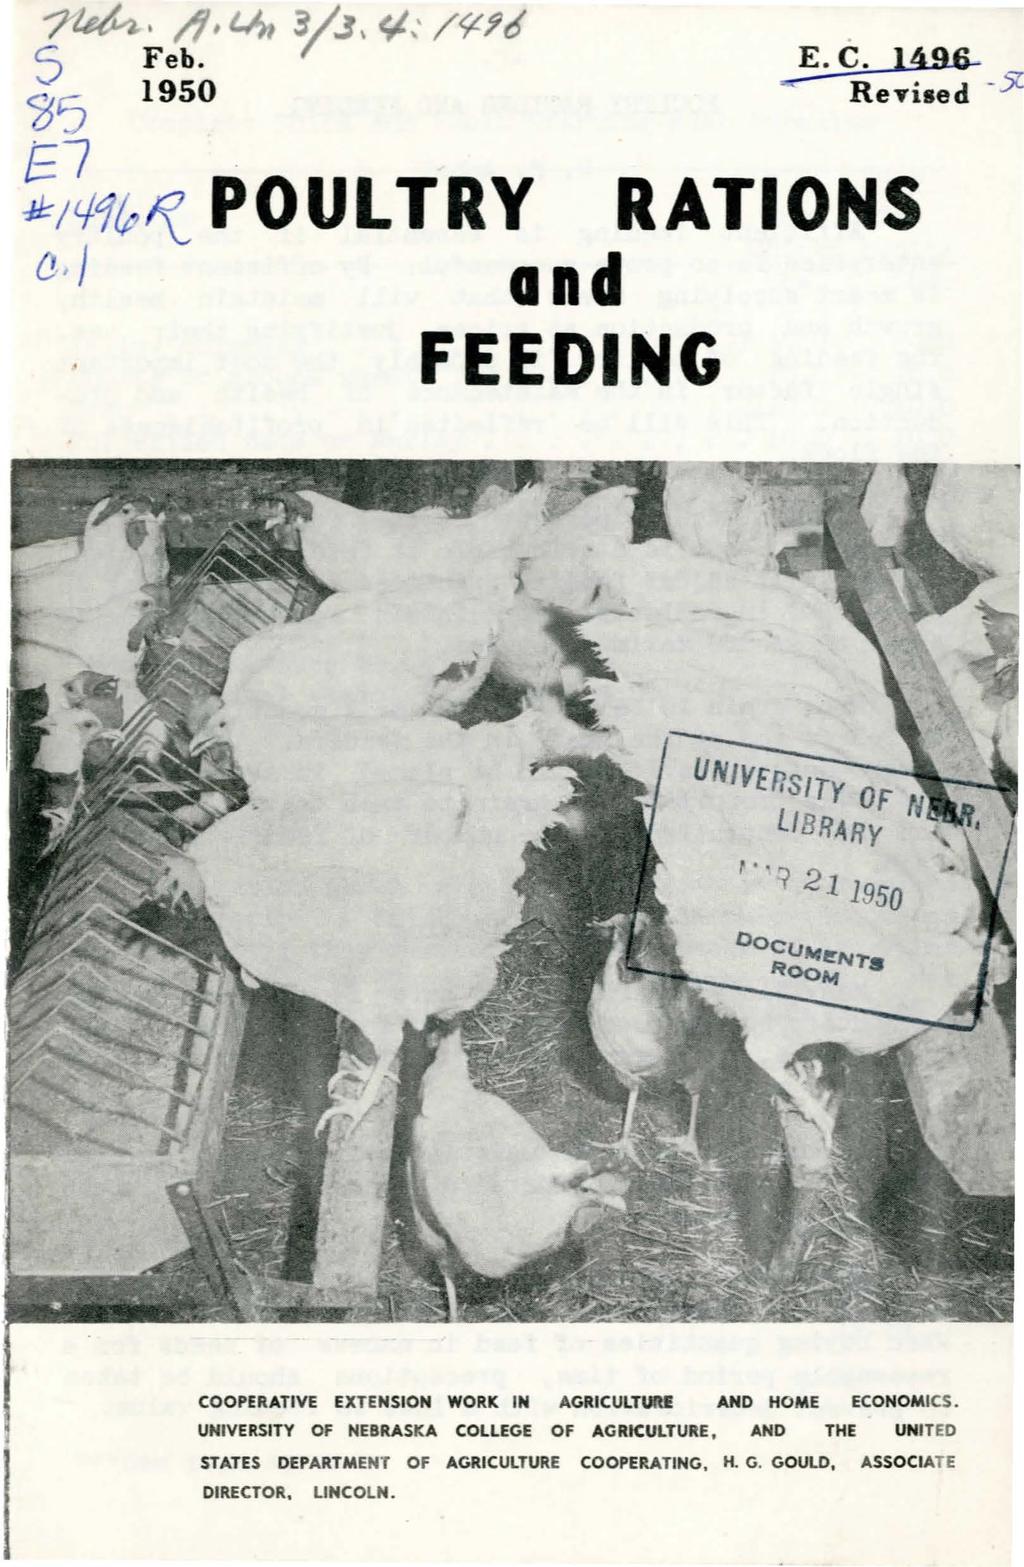 E. C. 1496-...- Revised -5. I{ POULTRY RATIONS and FEEDING UNIVERSITy OF LIBRARy /.